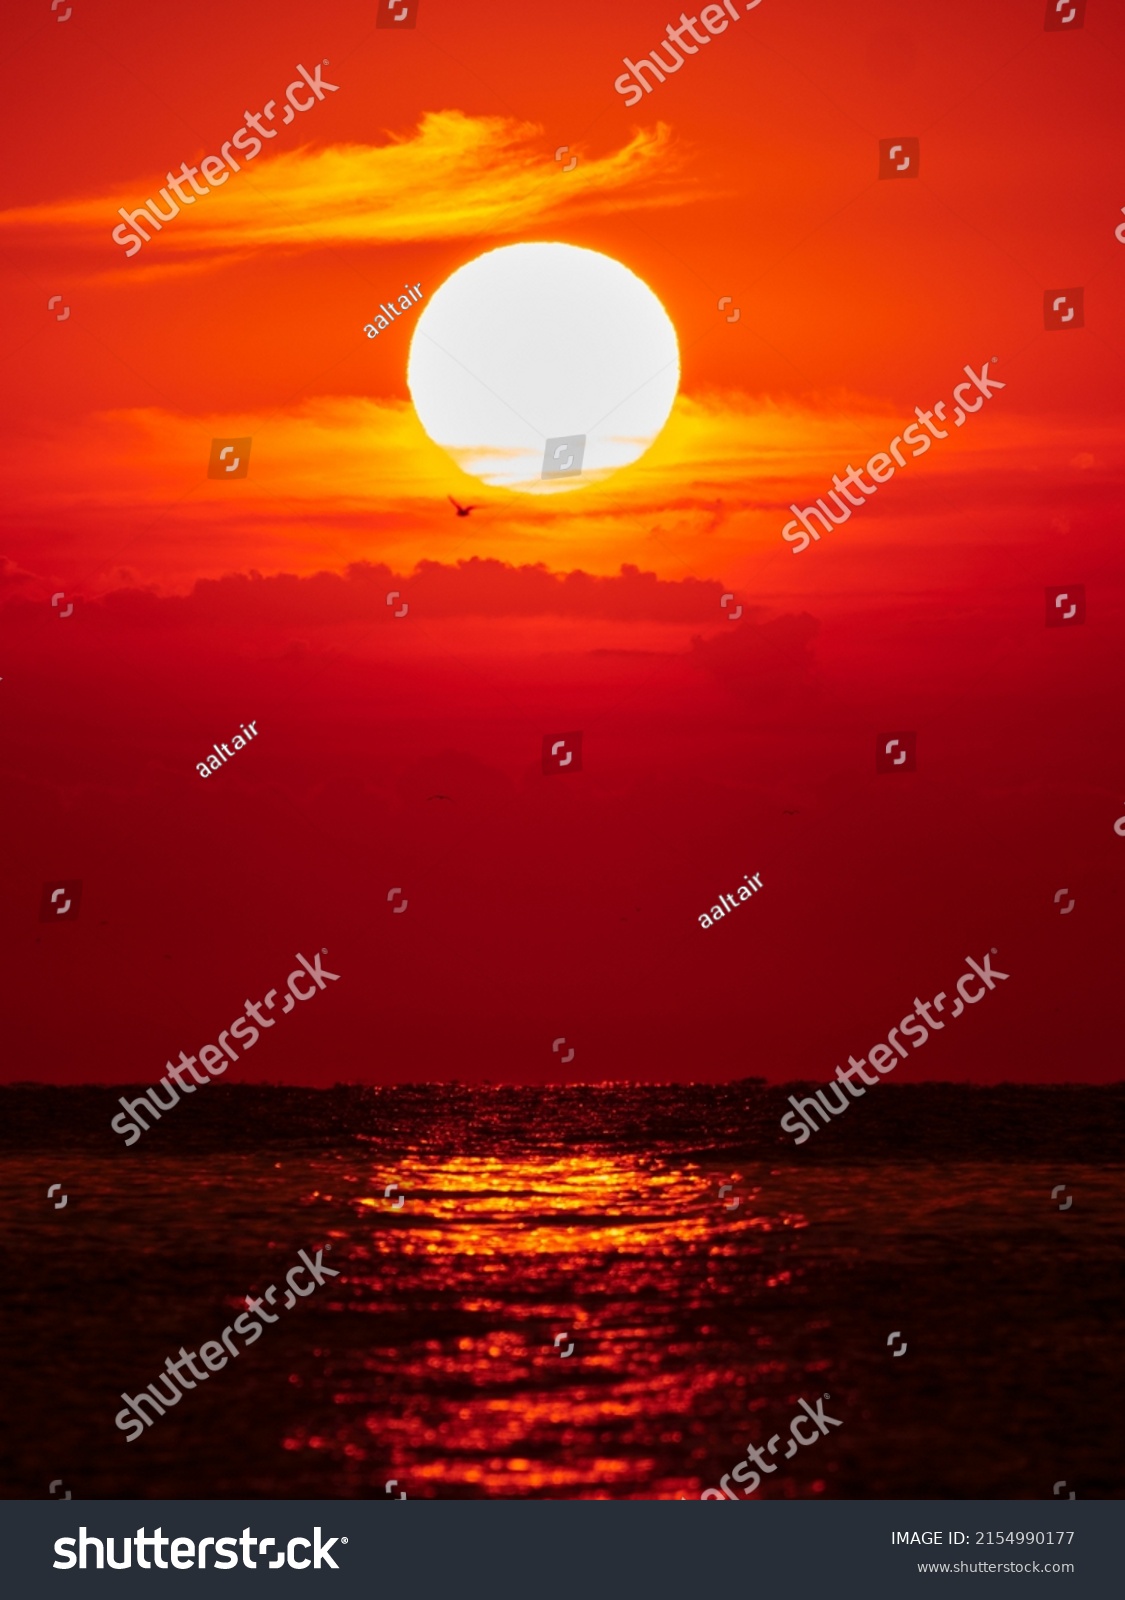 evening sunset sky with sun and clouds in red tones, silhouettes of birds flying over the water #2154990177